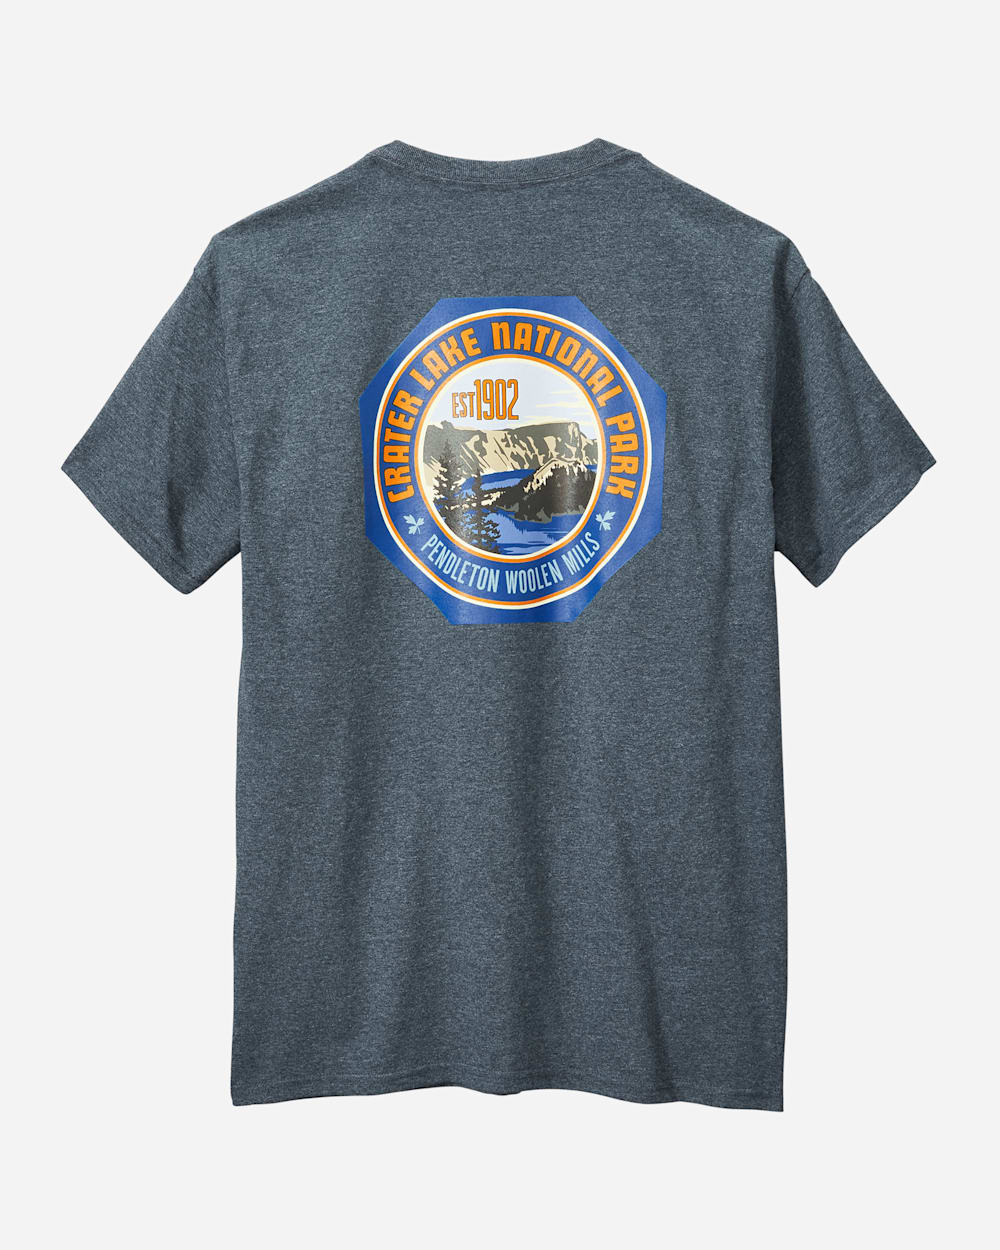 ALTERNATE VIEW OF MEN'S CRATER LAKE PARK TEE IN SLATE HEATHER image number 1